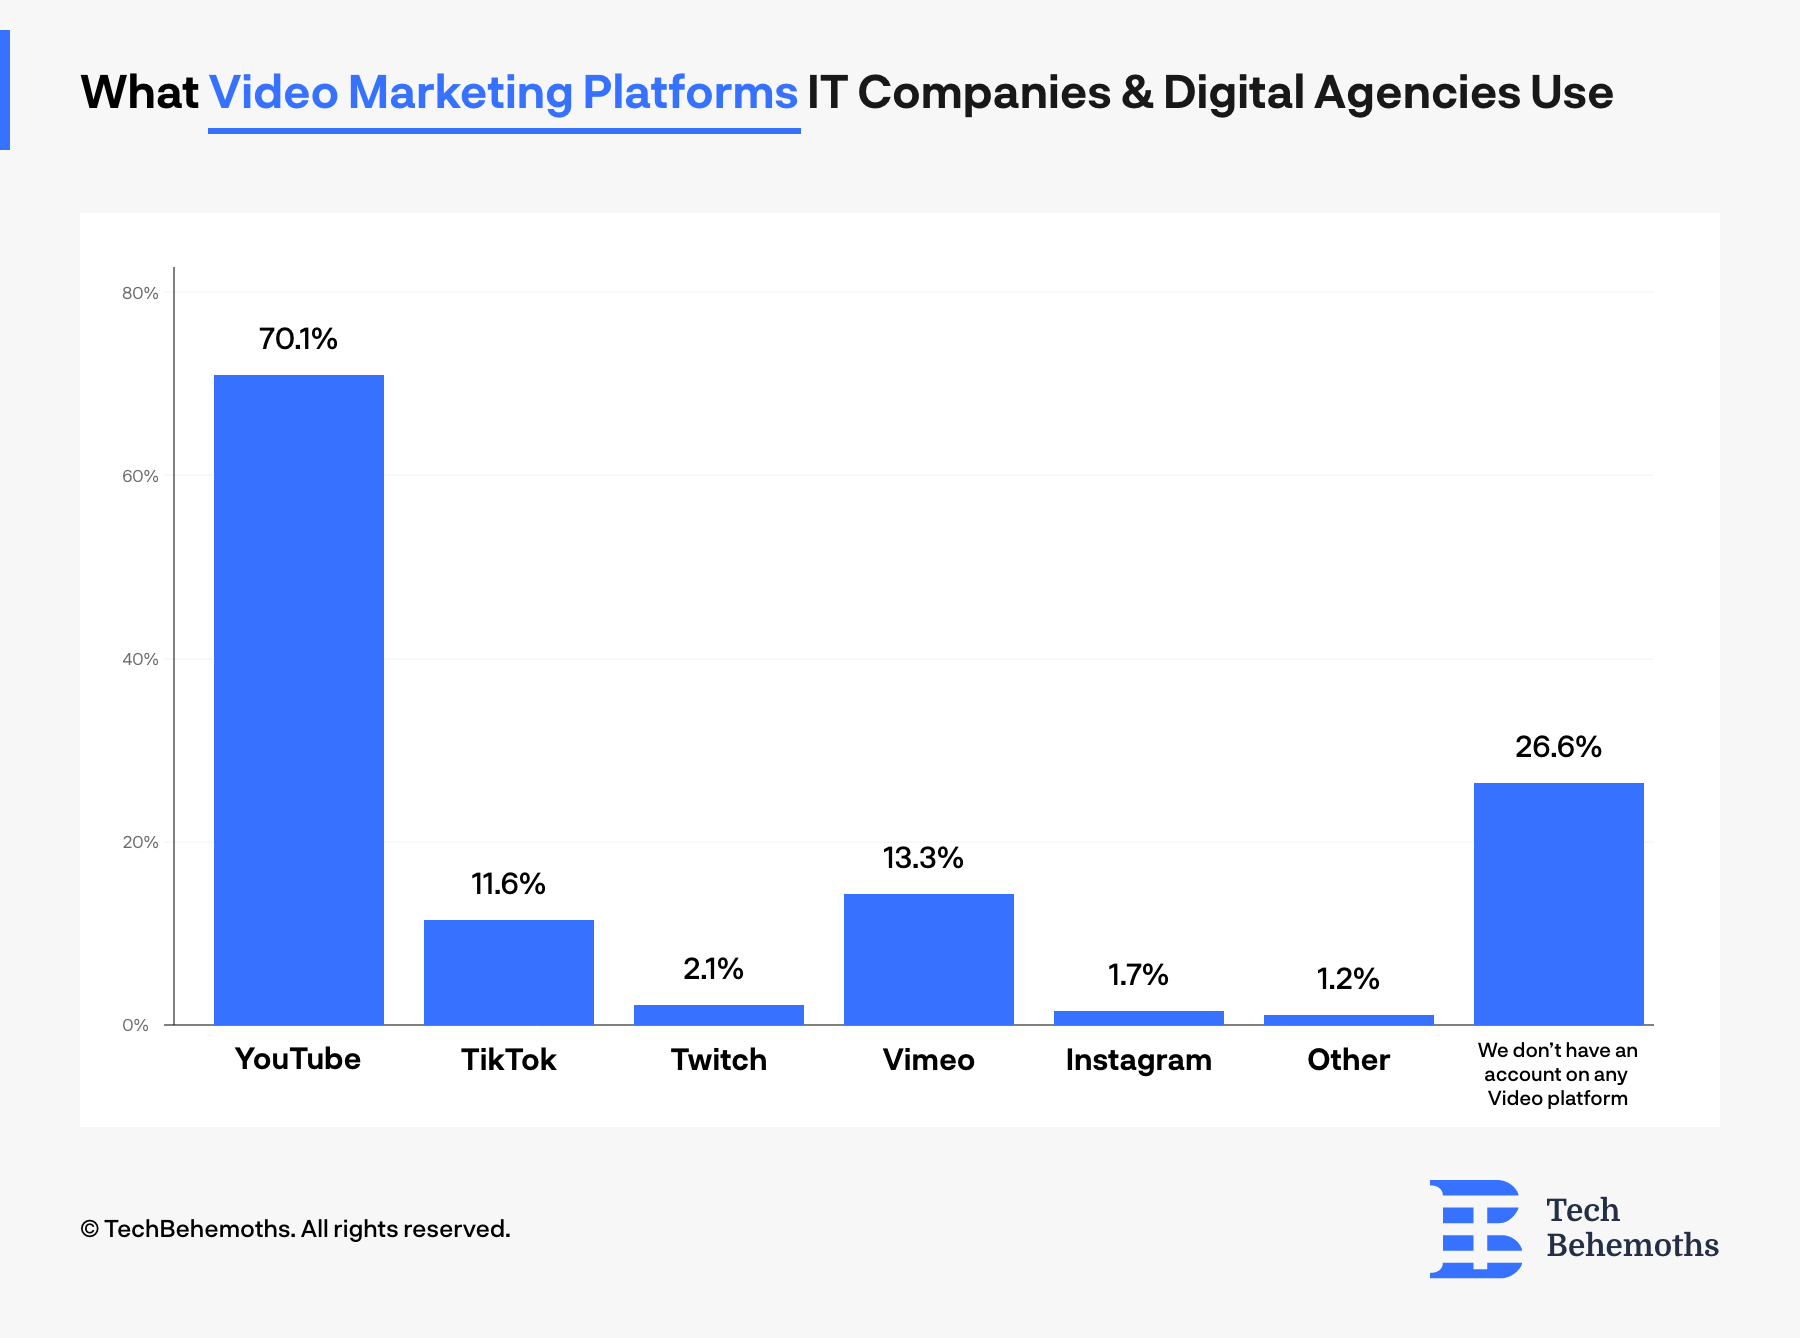 Video marketing platforms IT companies and digital agencies use most - survey results